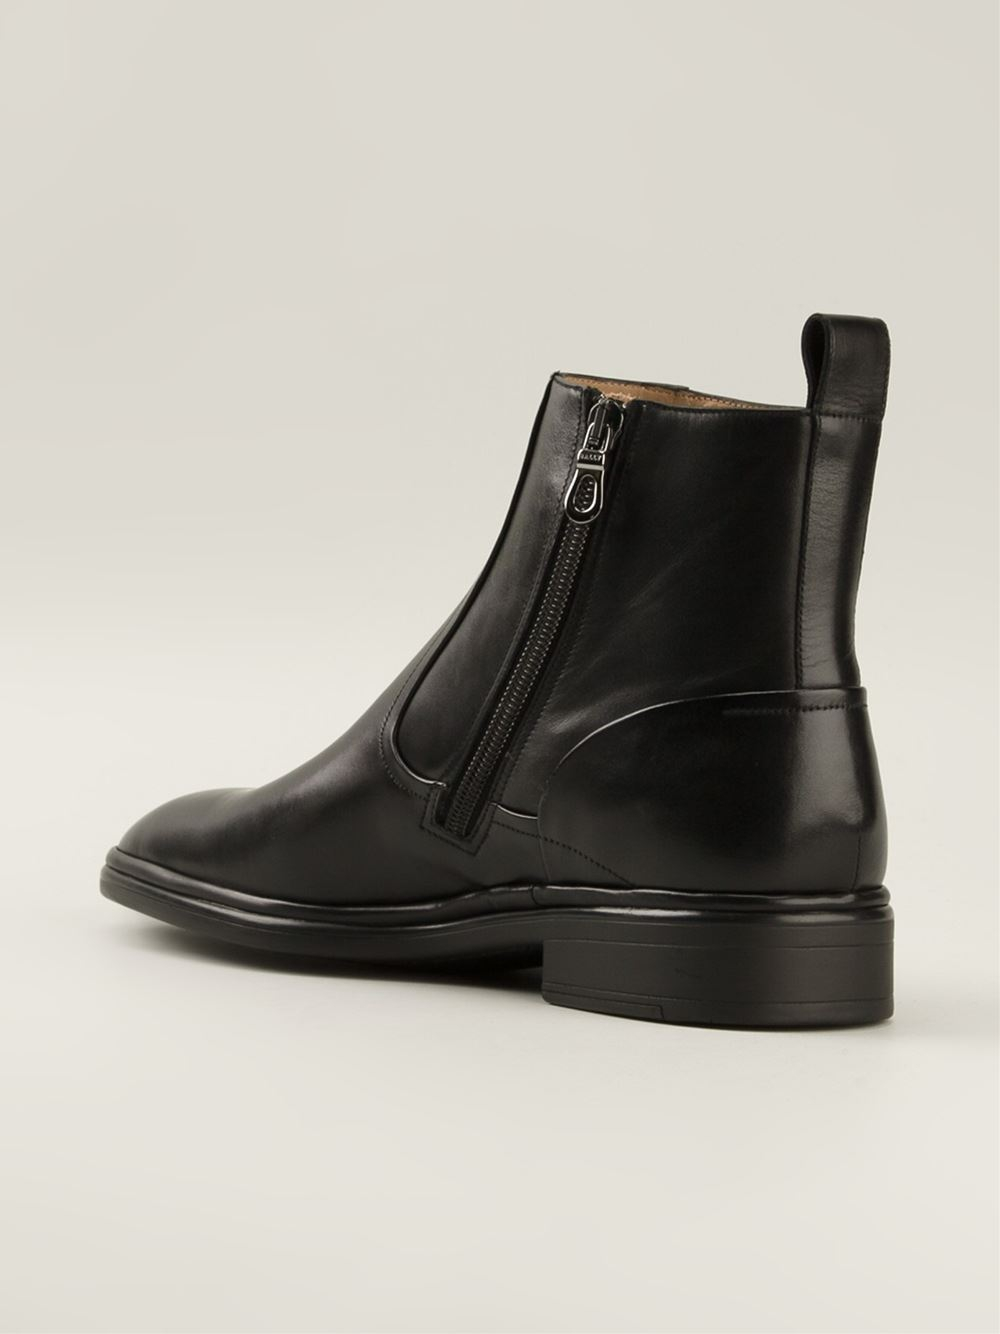 Bally Ankle Boots in Black for Men - Lyst